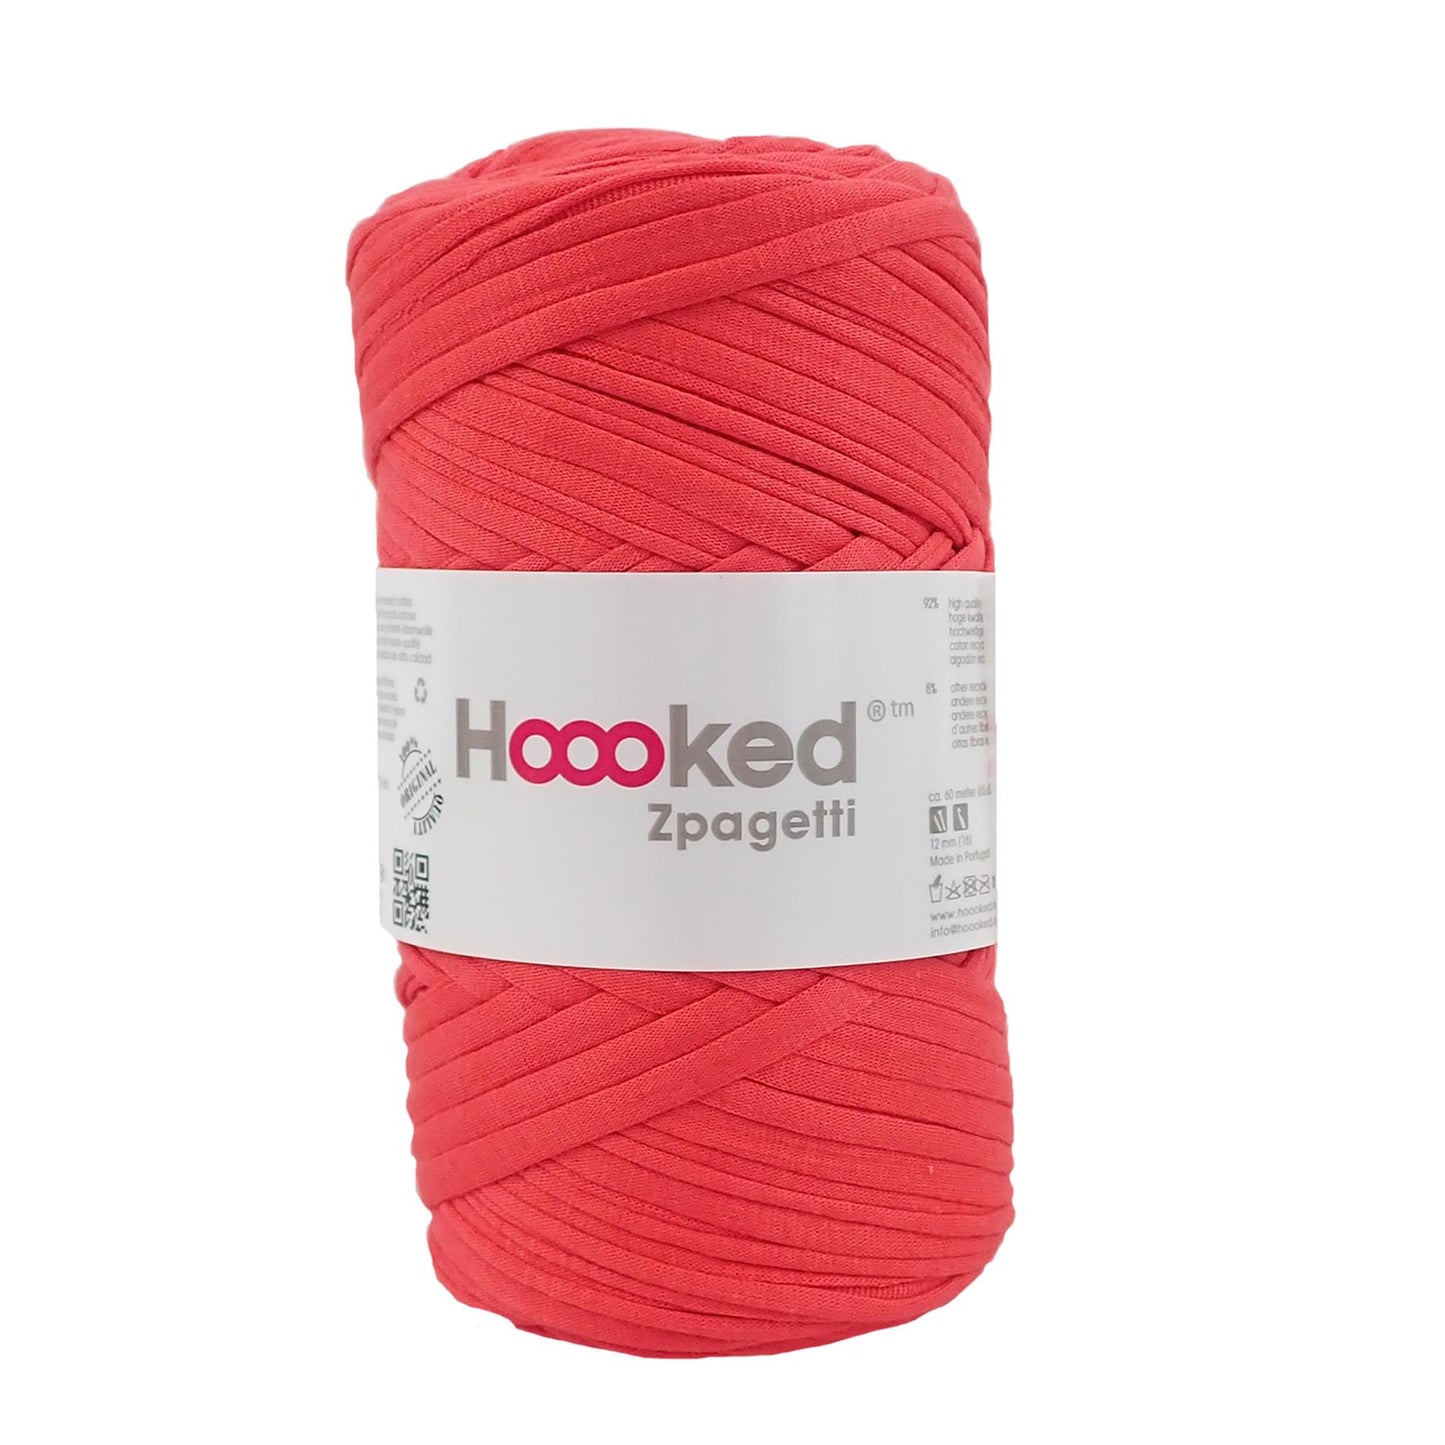 Hoooked Zpagetti Red Cotton T-Shirt Yarn - 60M 350g